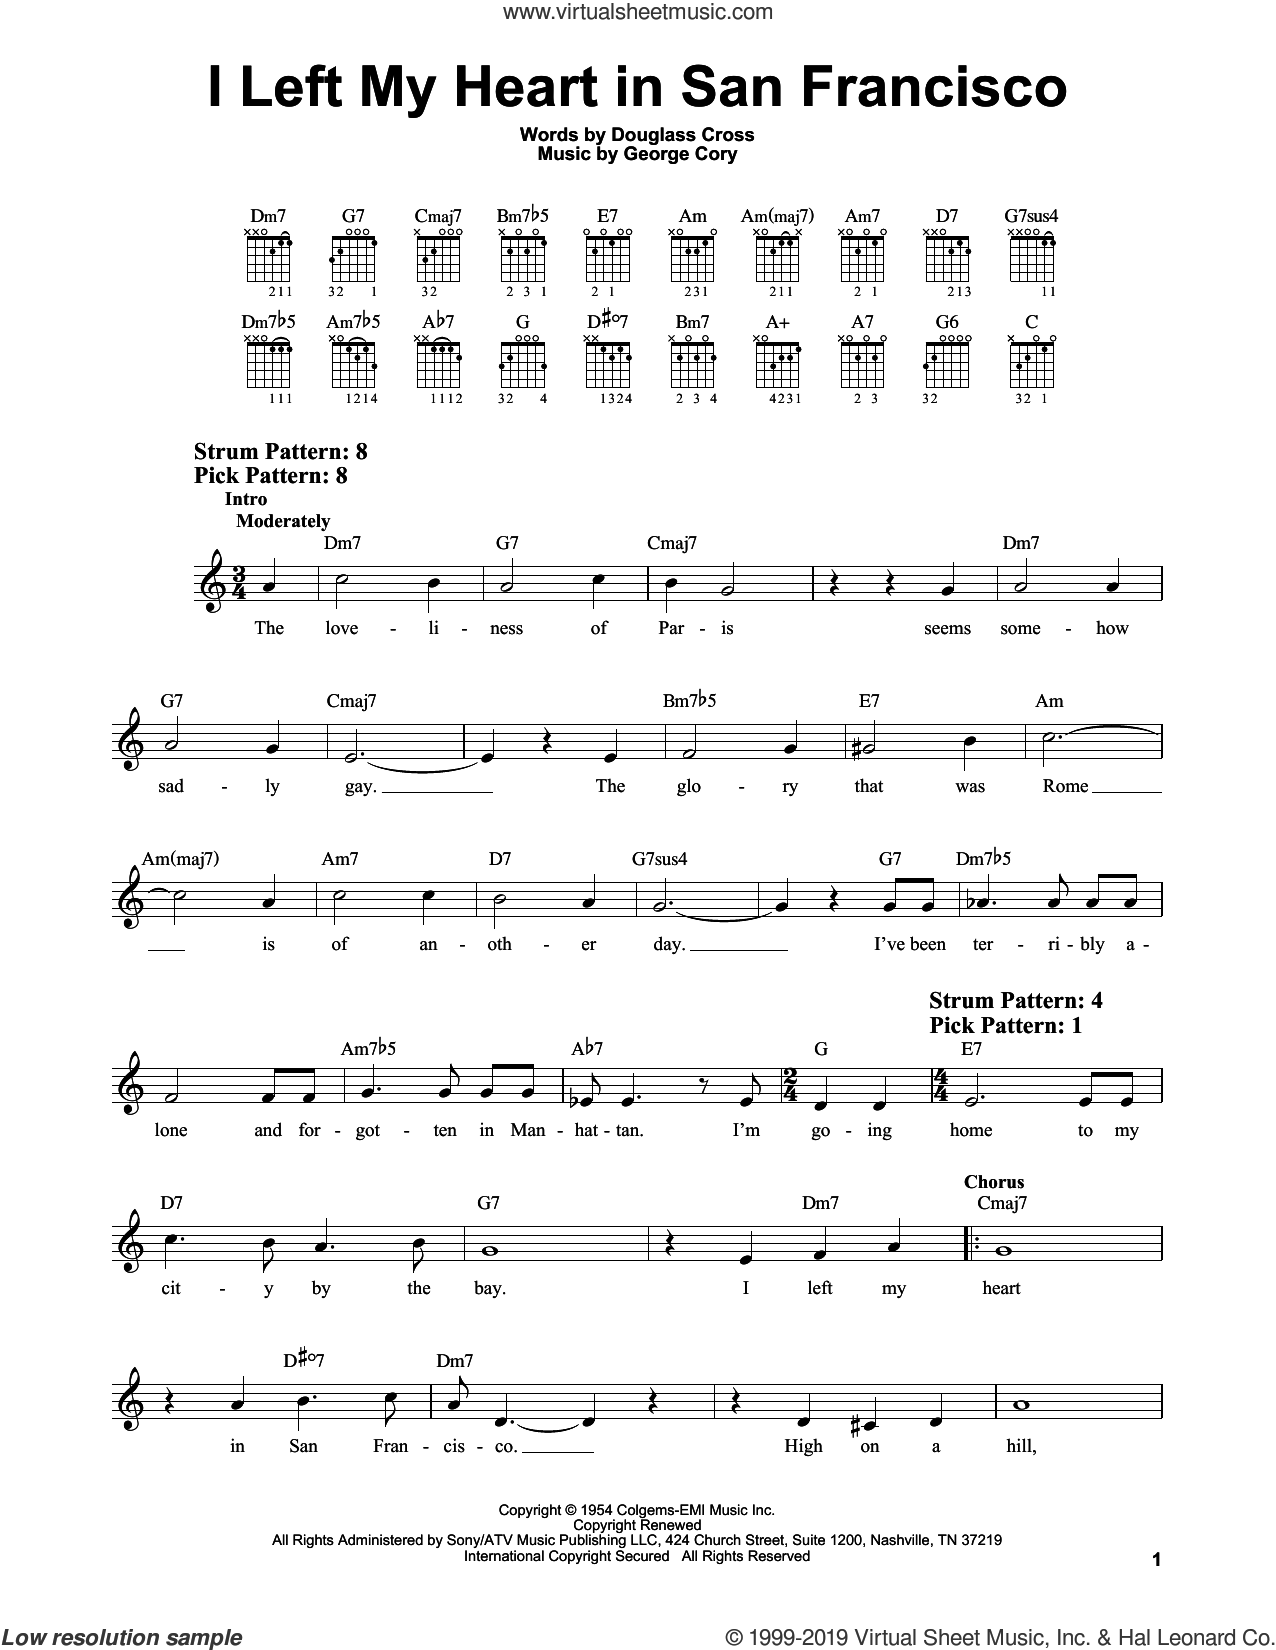 The Beatles - Two of Us  Guitar Lesson, tab & chords - Jerry's